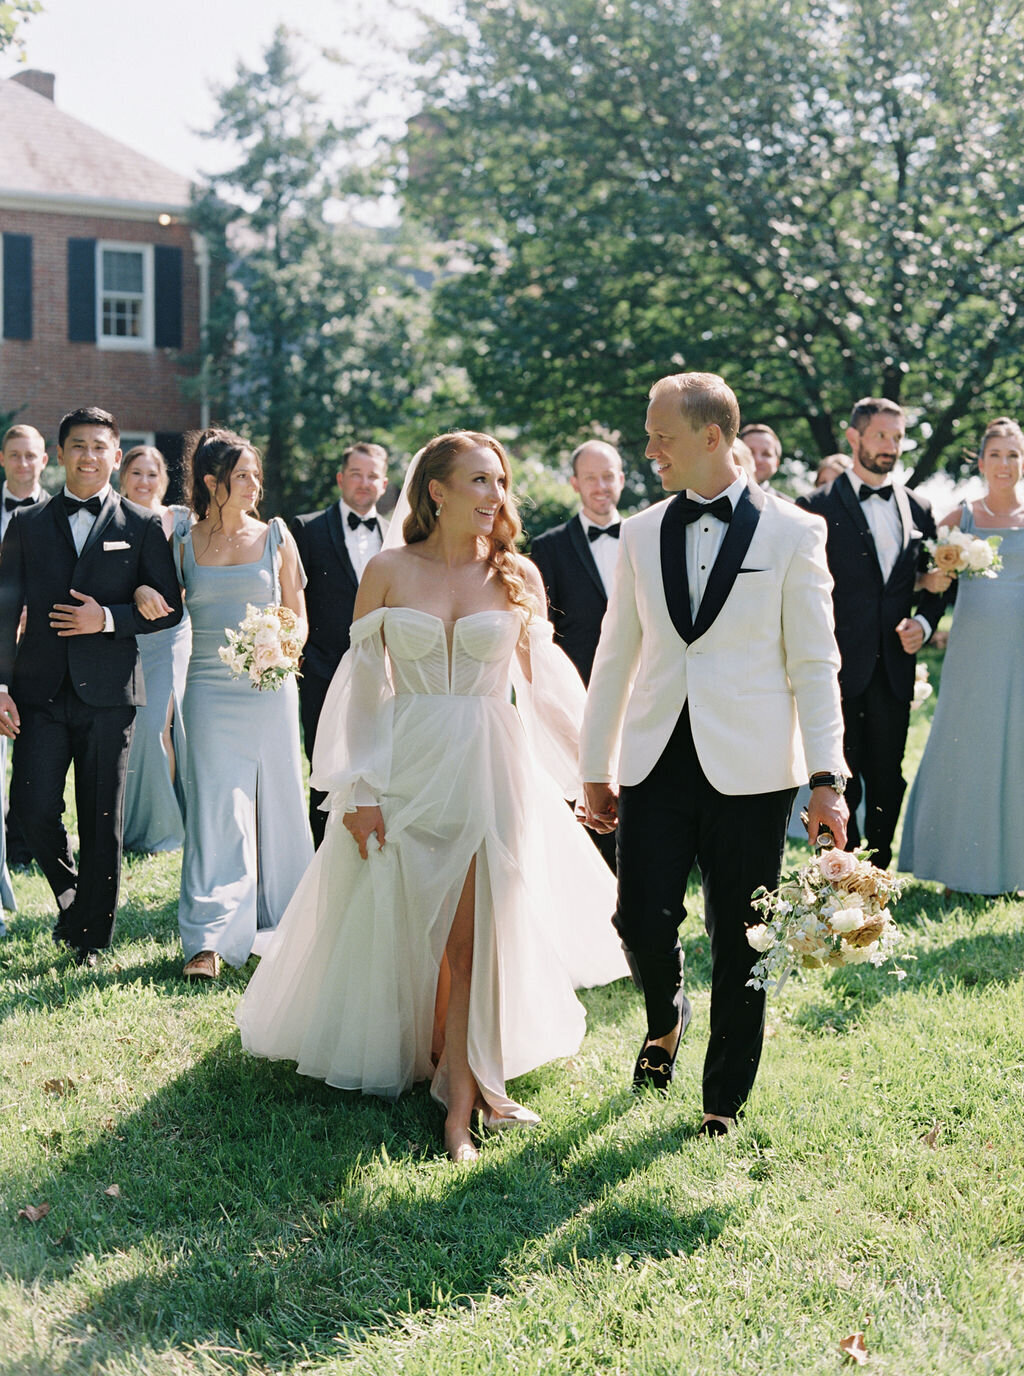 Bride and groom walking in front of the bridal party outside of the Brittland Estate mansion wearing a white tuxedo and an off the shoulder dress.